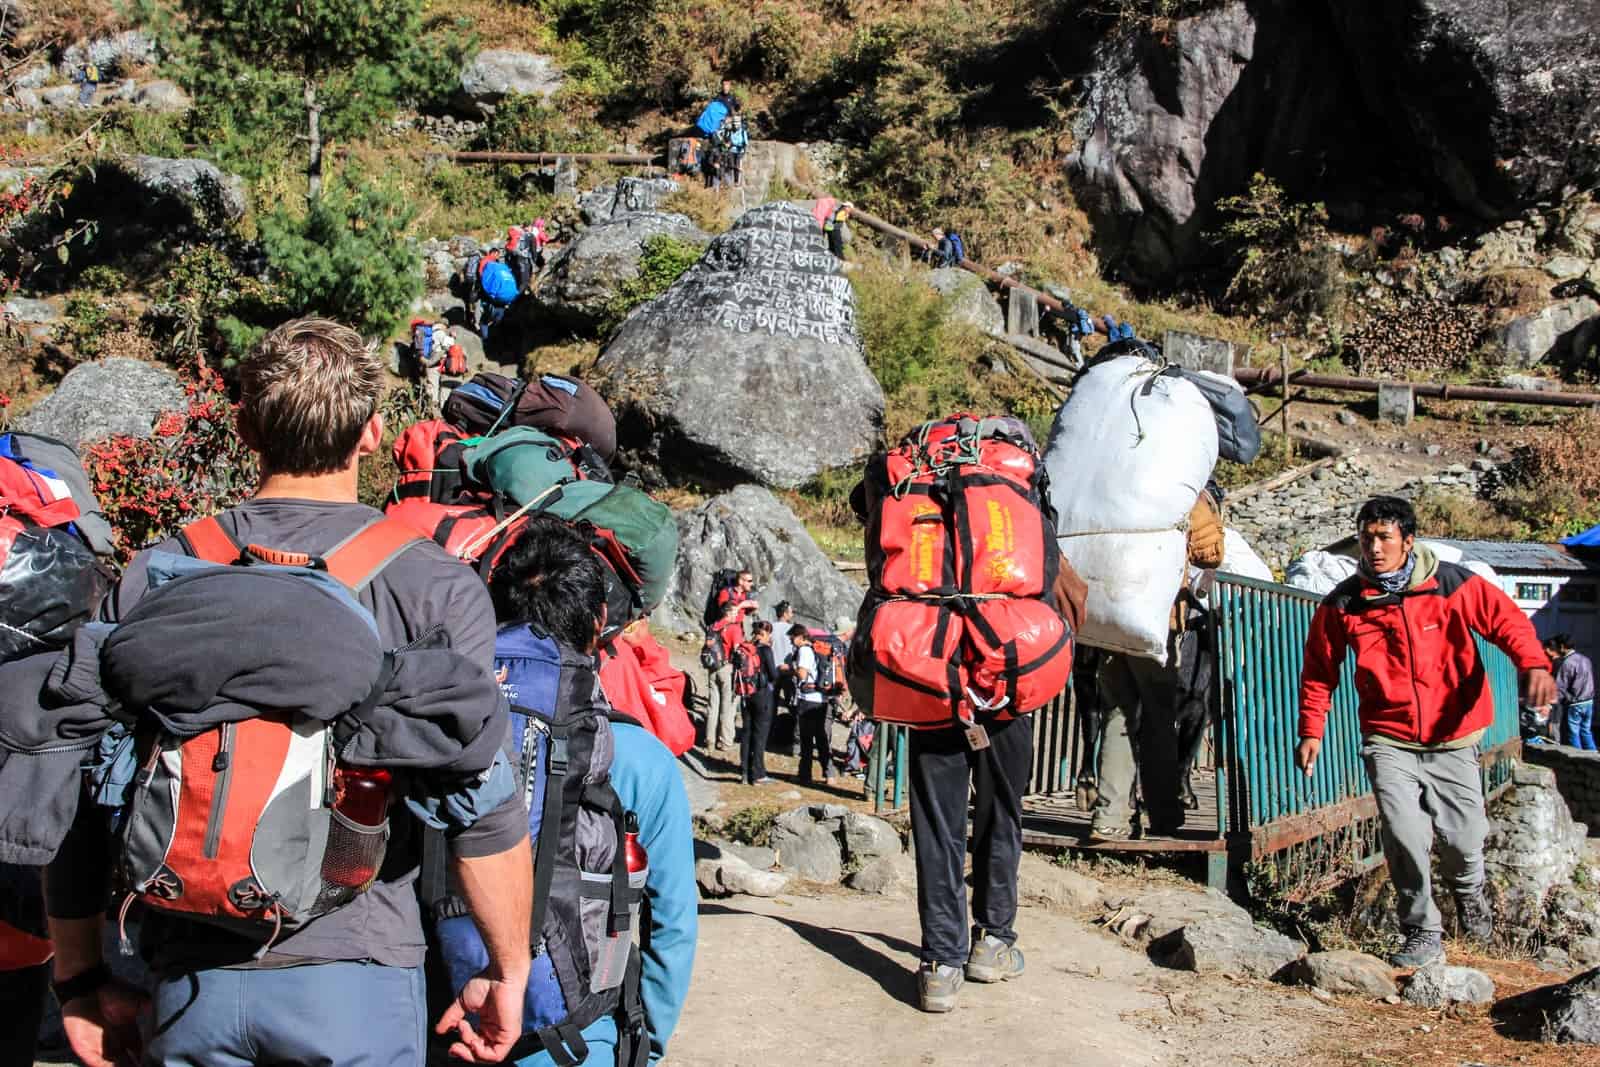 A line of trekkers and porters make their way across bridges and up the steep and rocky green hillside on the Everest Base Camp Trek